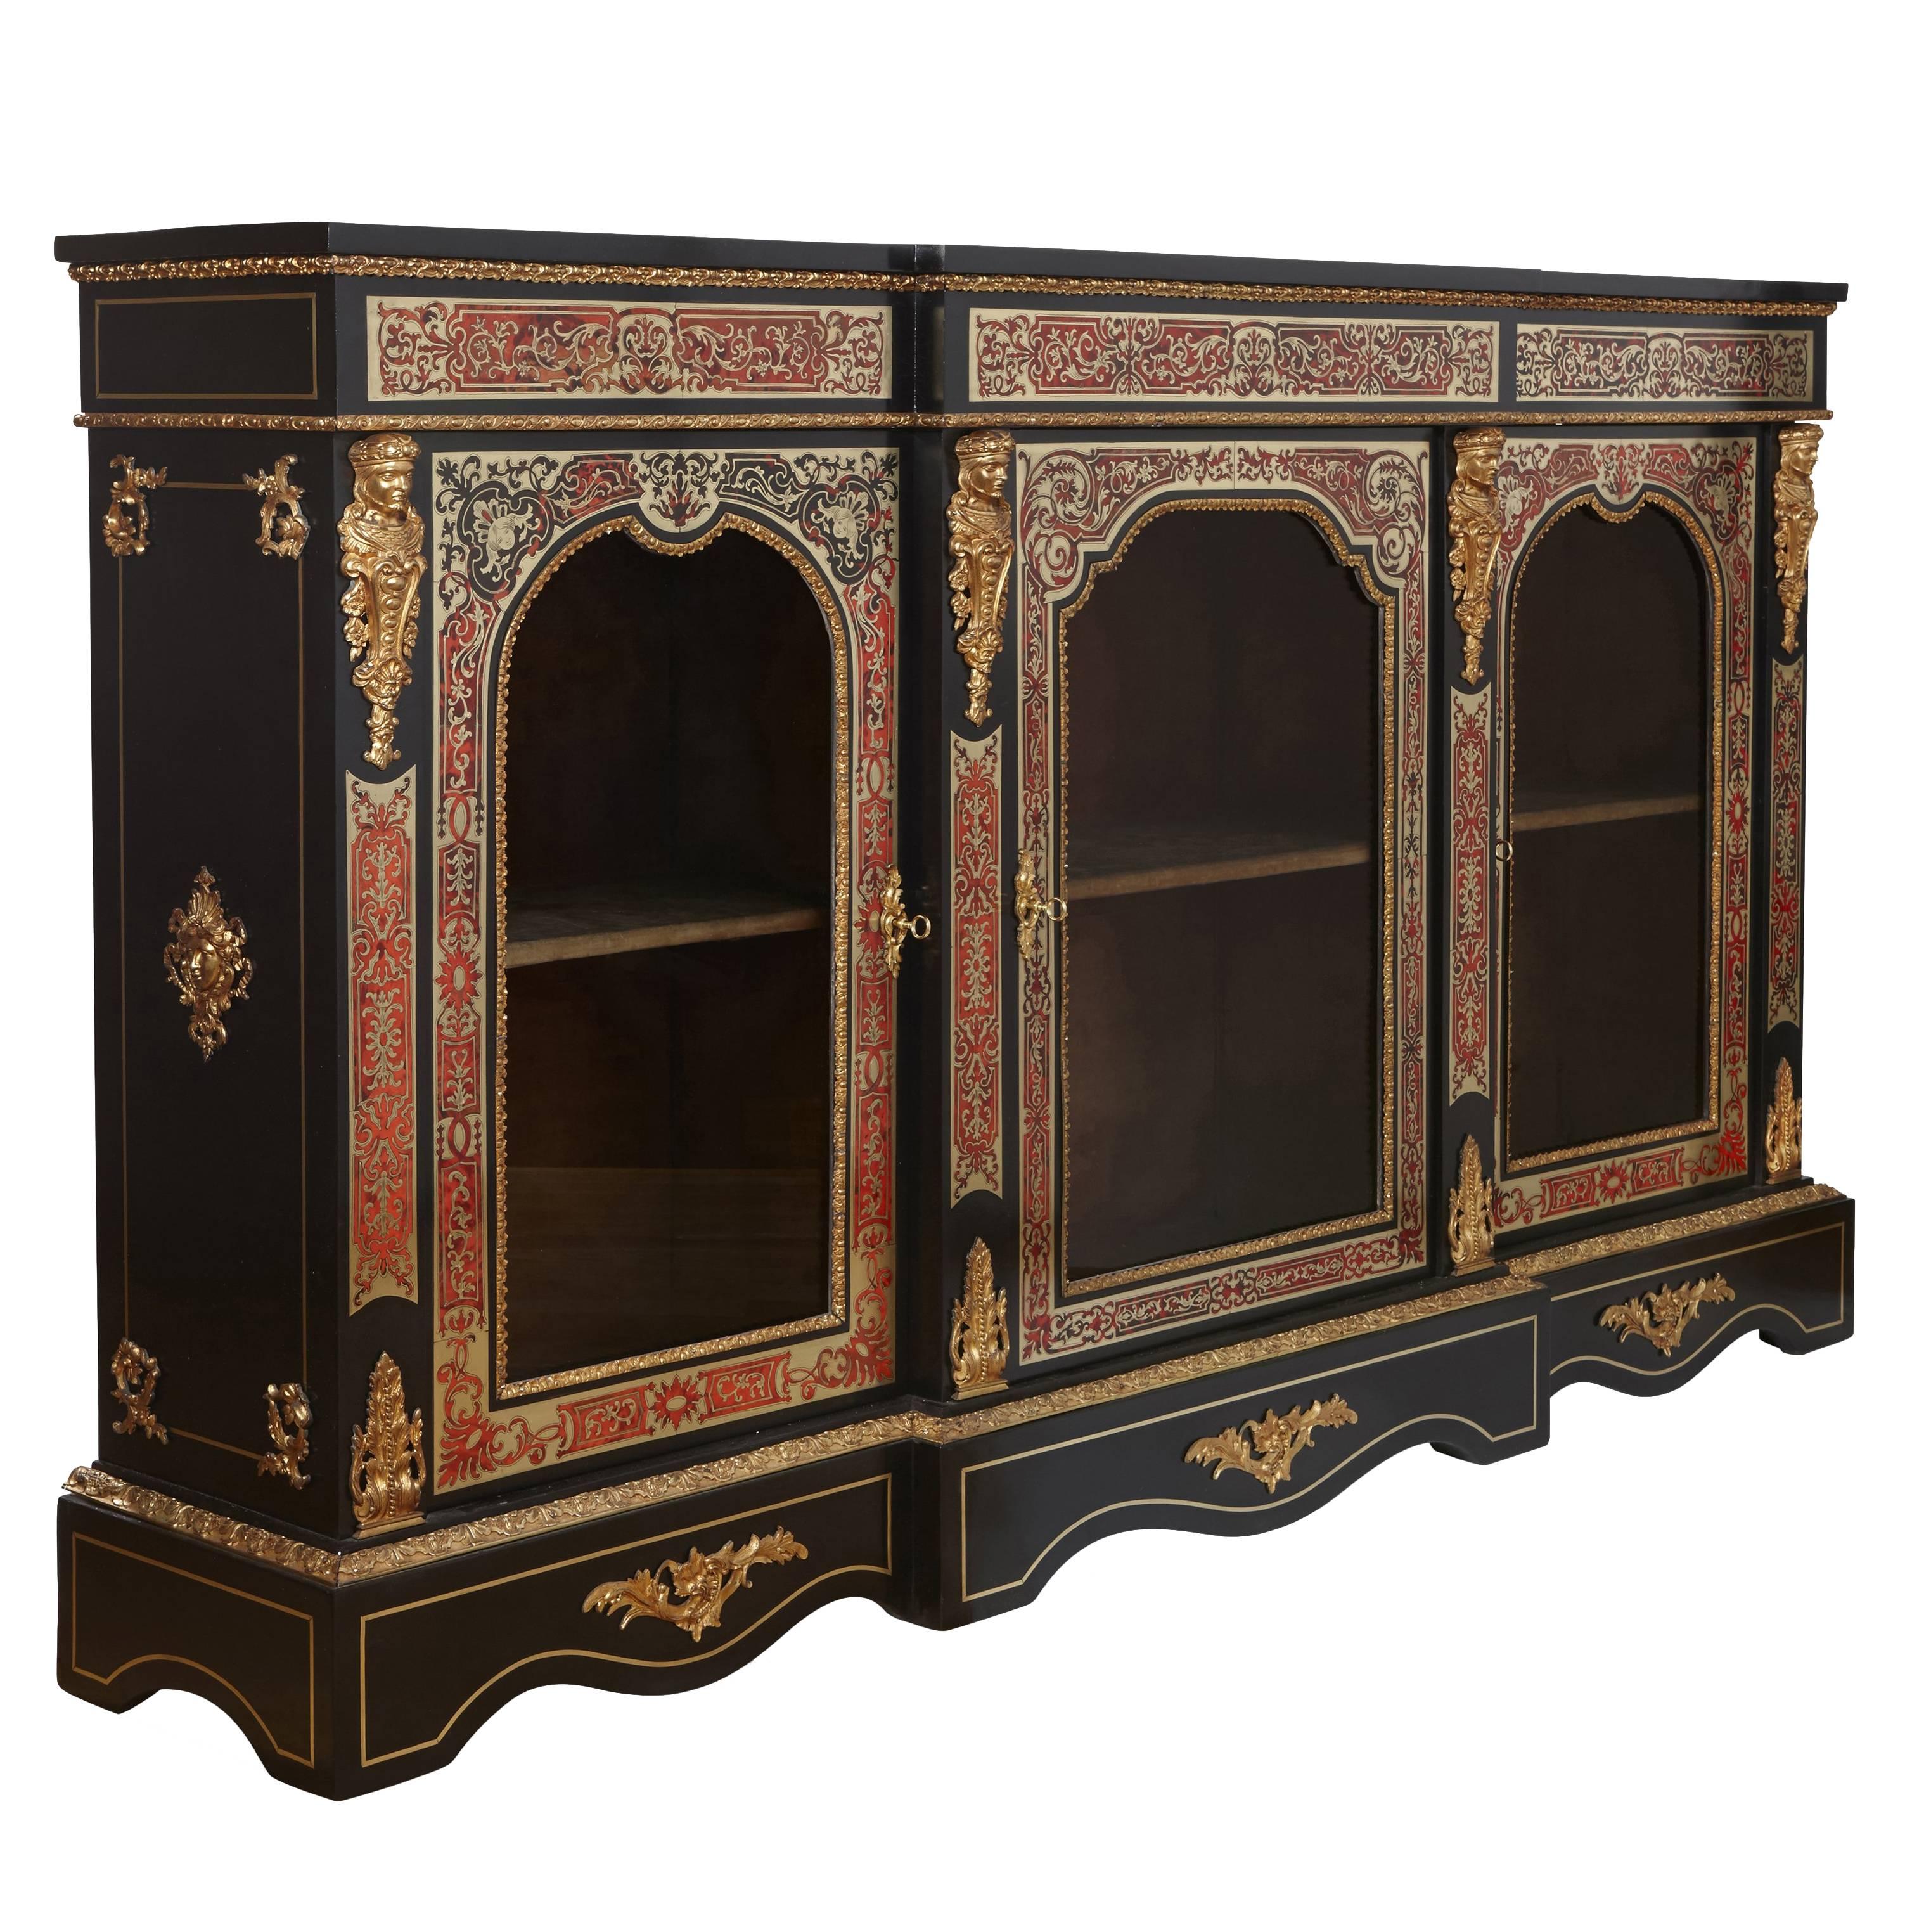 Victorian Ormolu and Boulle Mounted Ebonised Wood Vitrine Cabinet by Druce & Co